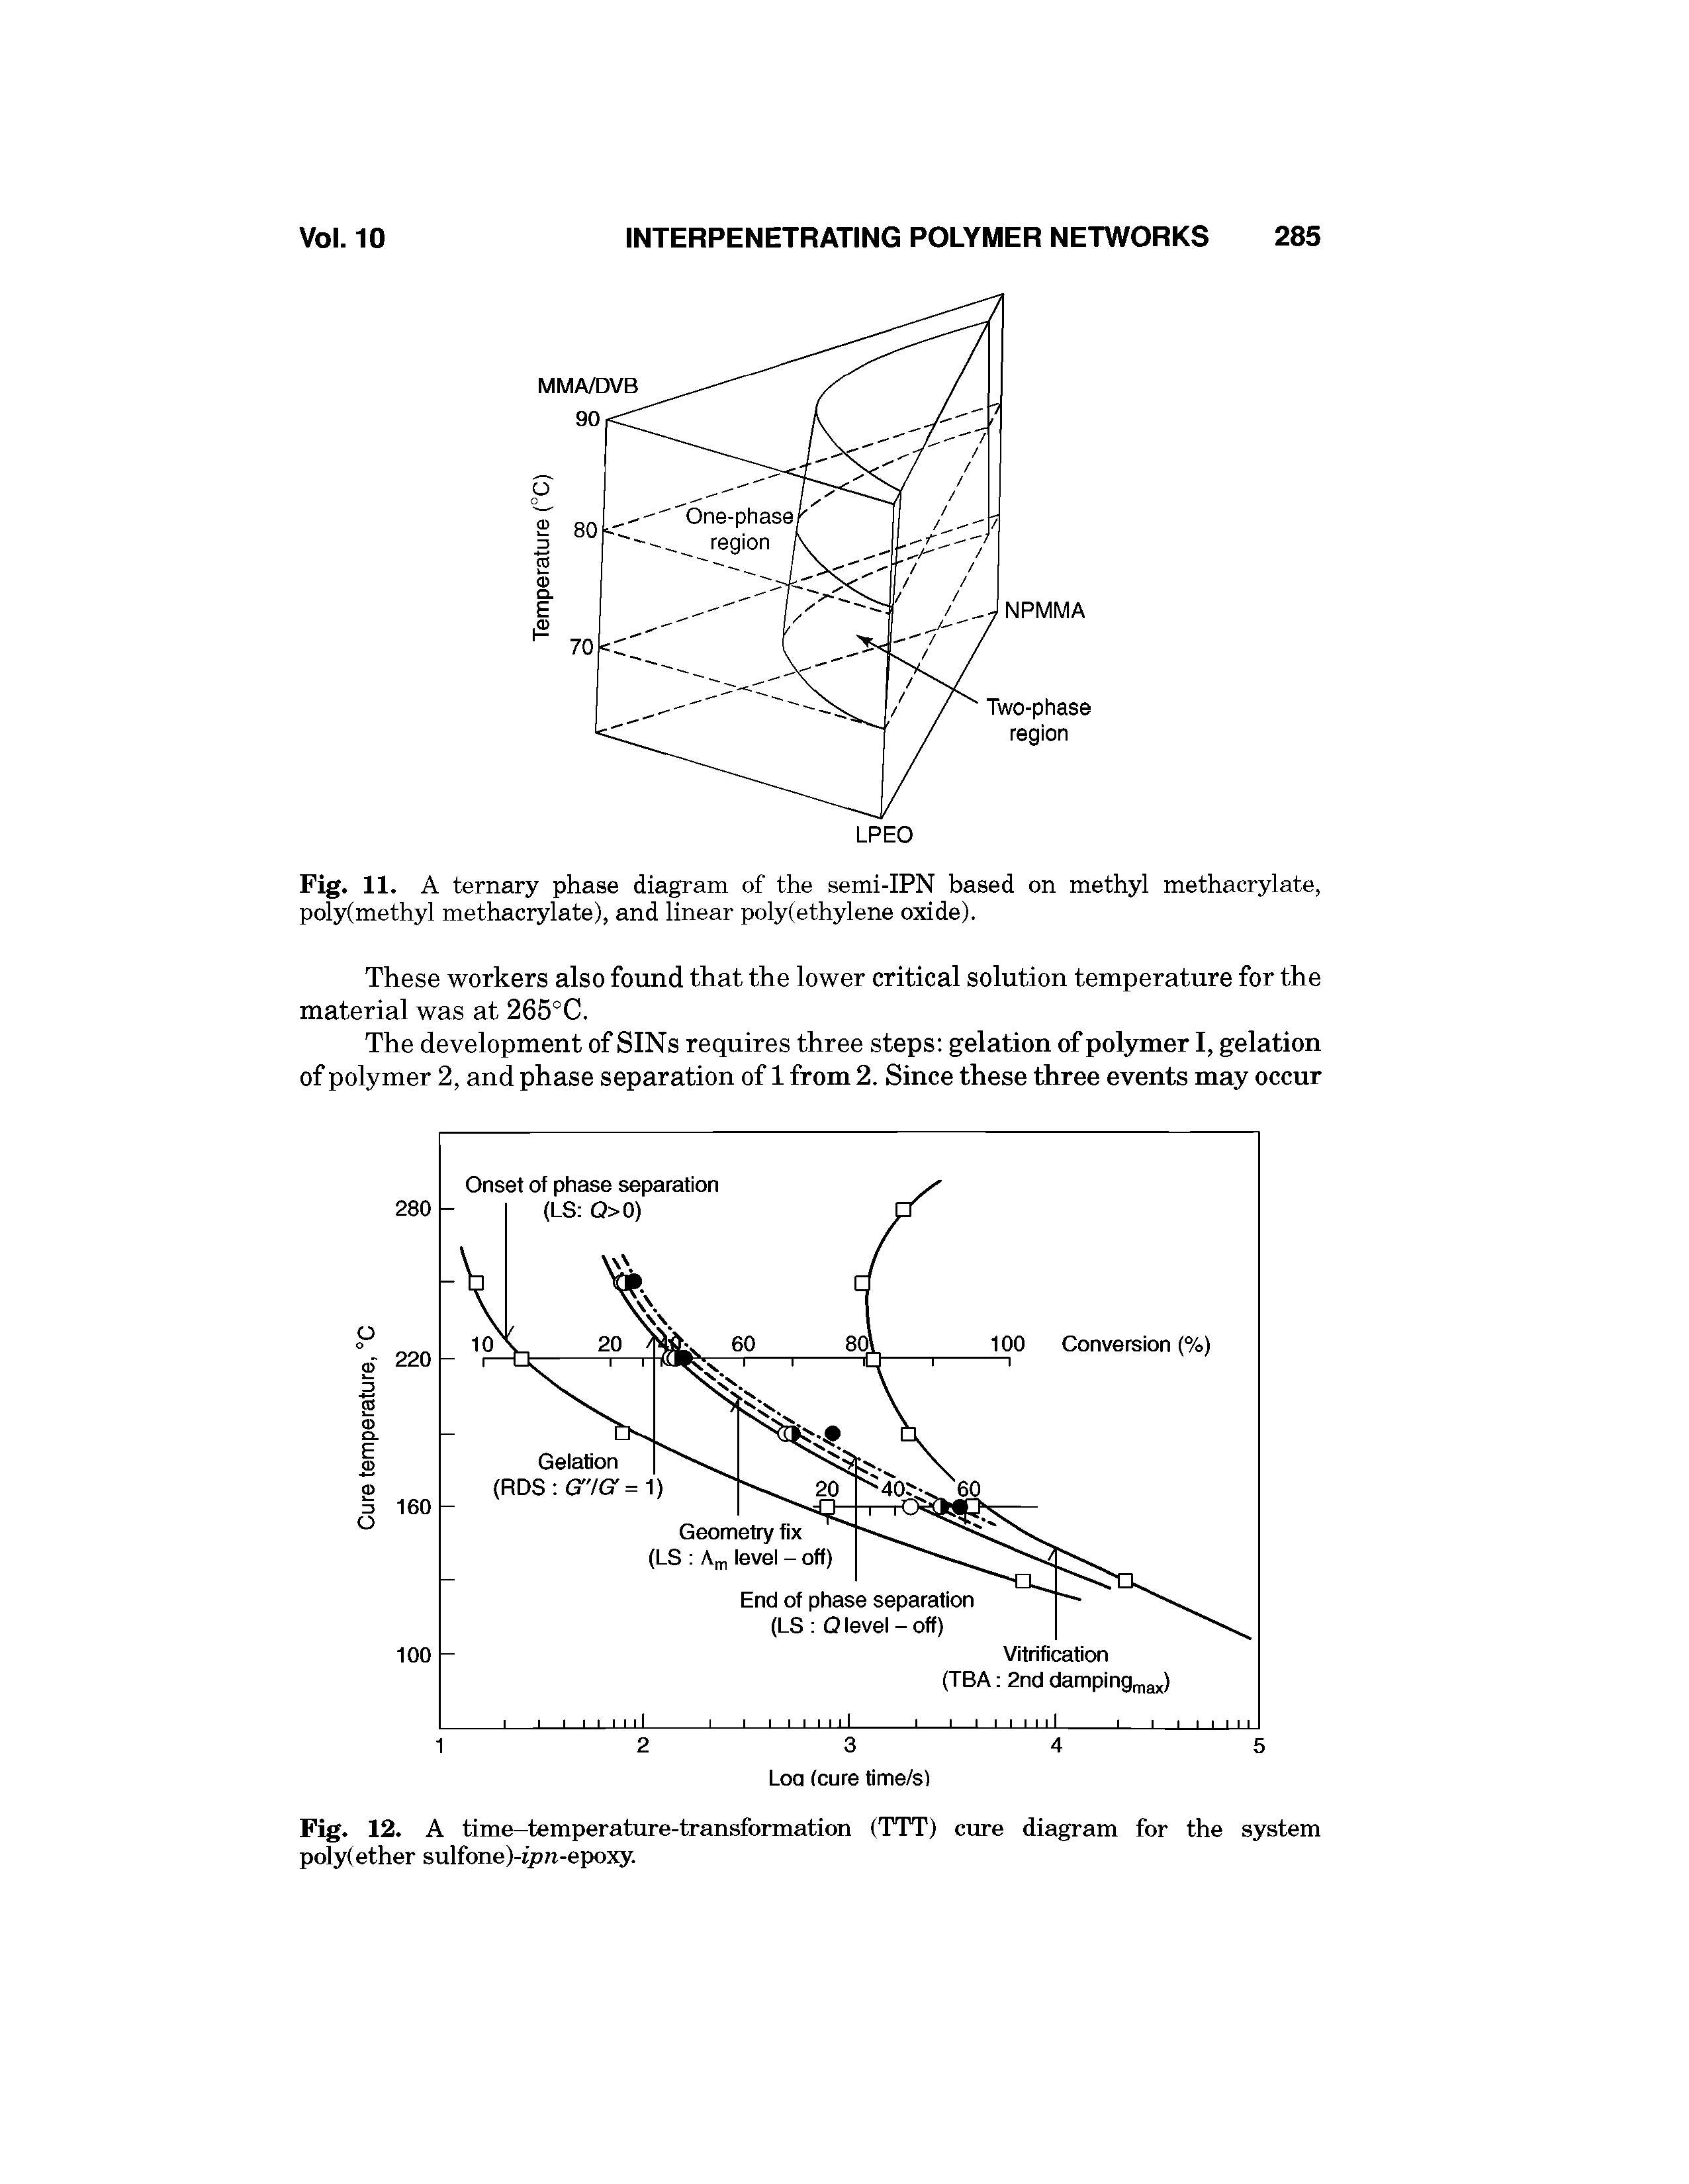 Fig. 11. A ternary phase diagram of the semi-IPN based on methyl methacrylate, poly(methyl methacrylate), and linear poly(ethylene oxide).